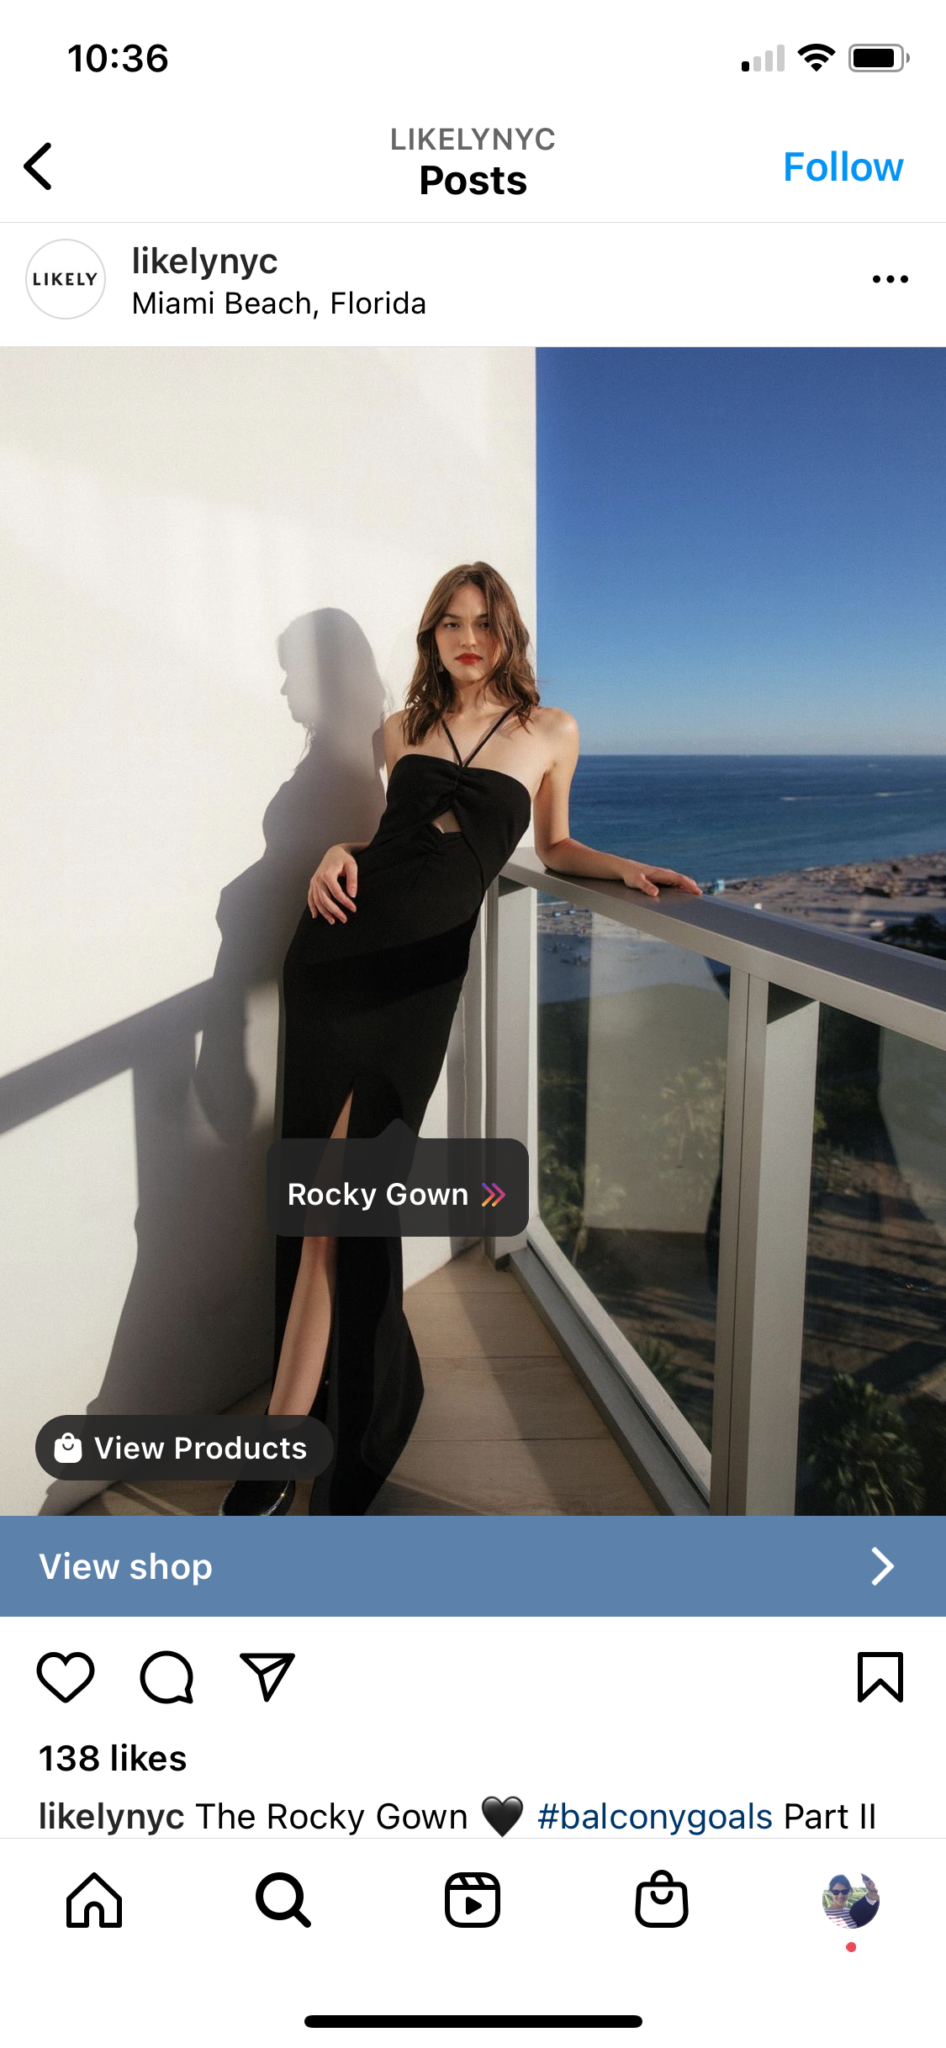 social shopping image that shows black dress for sale